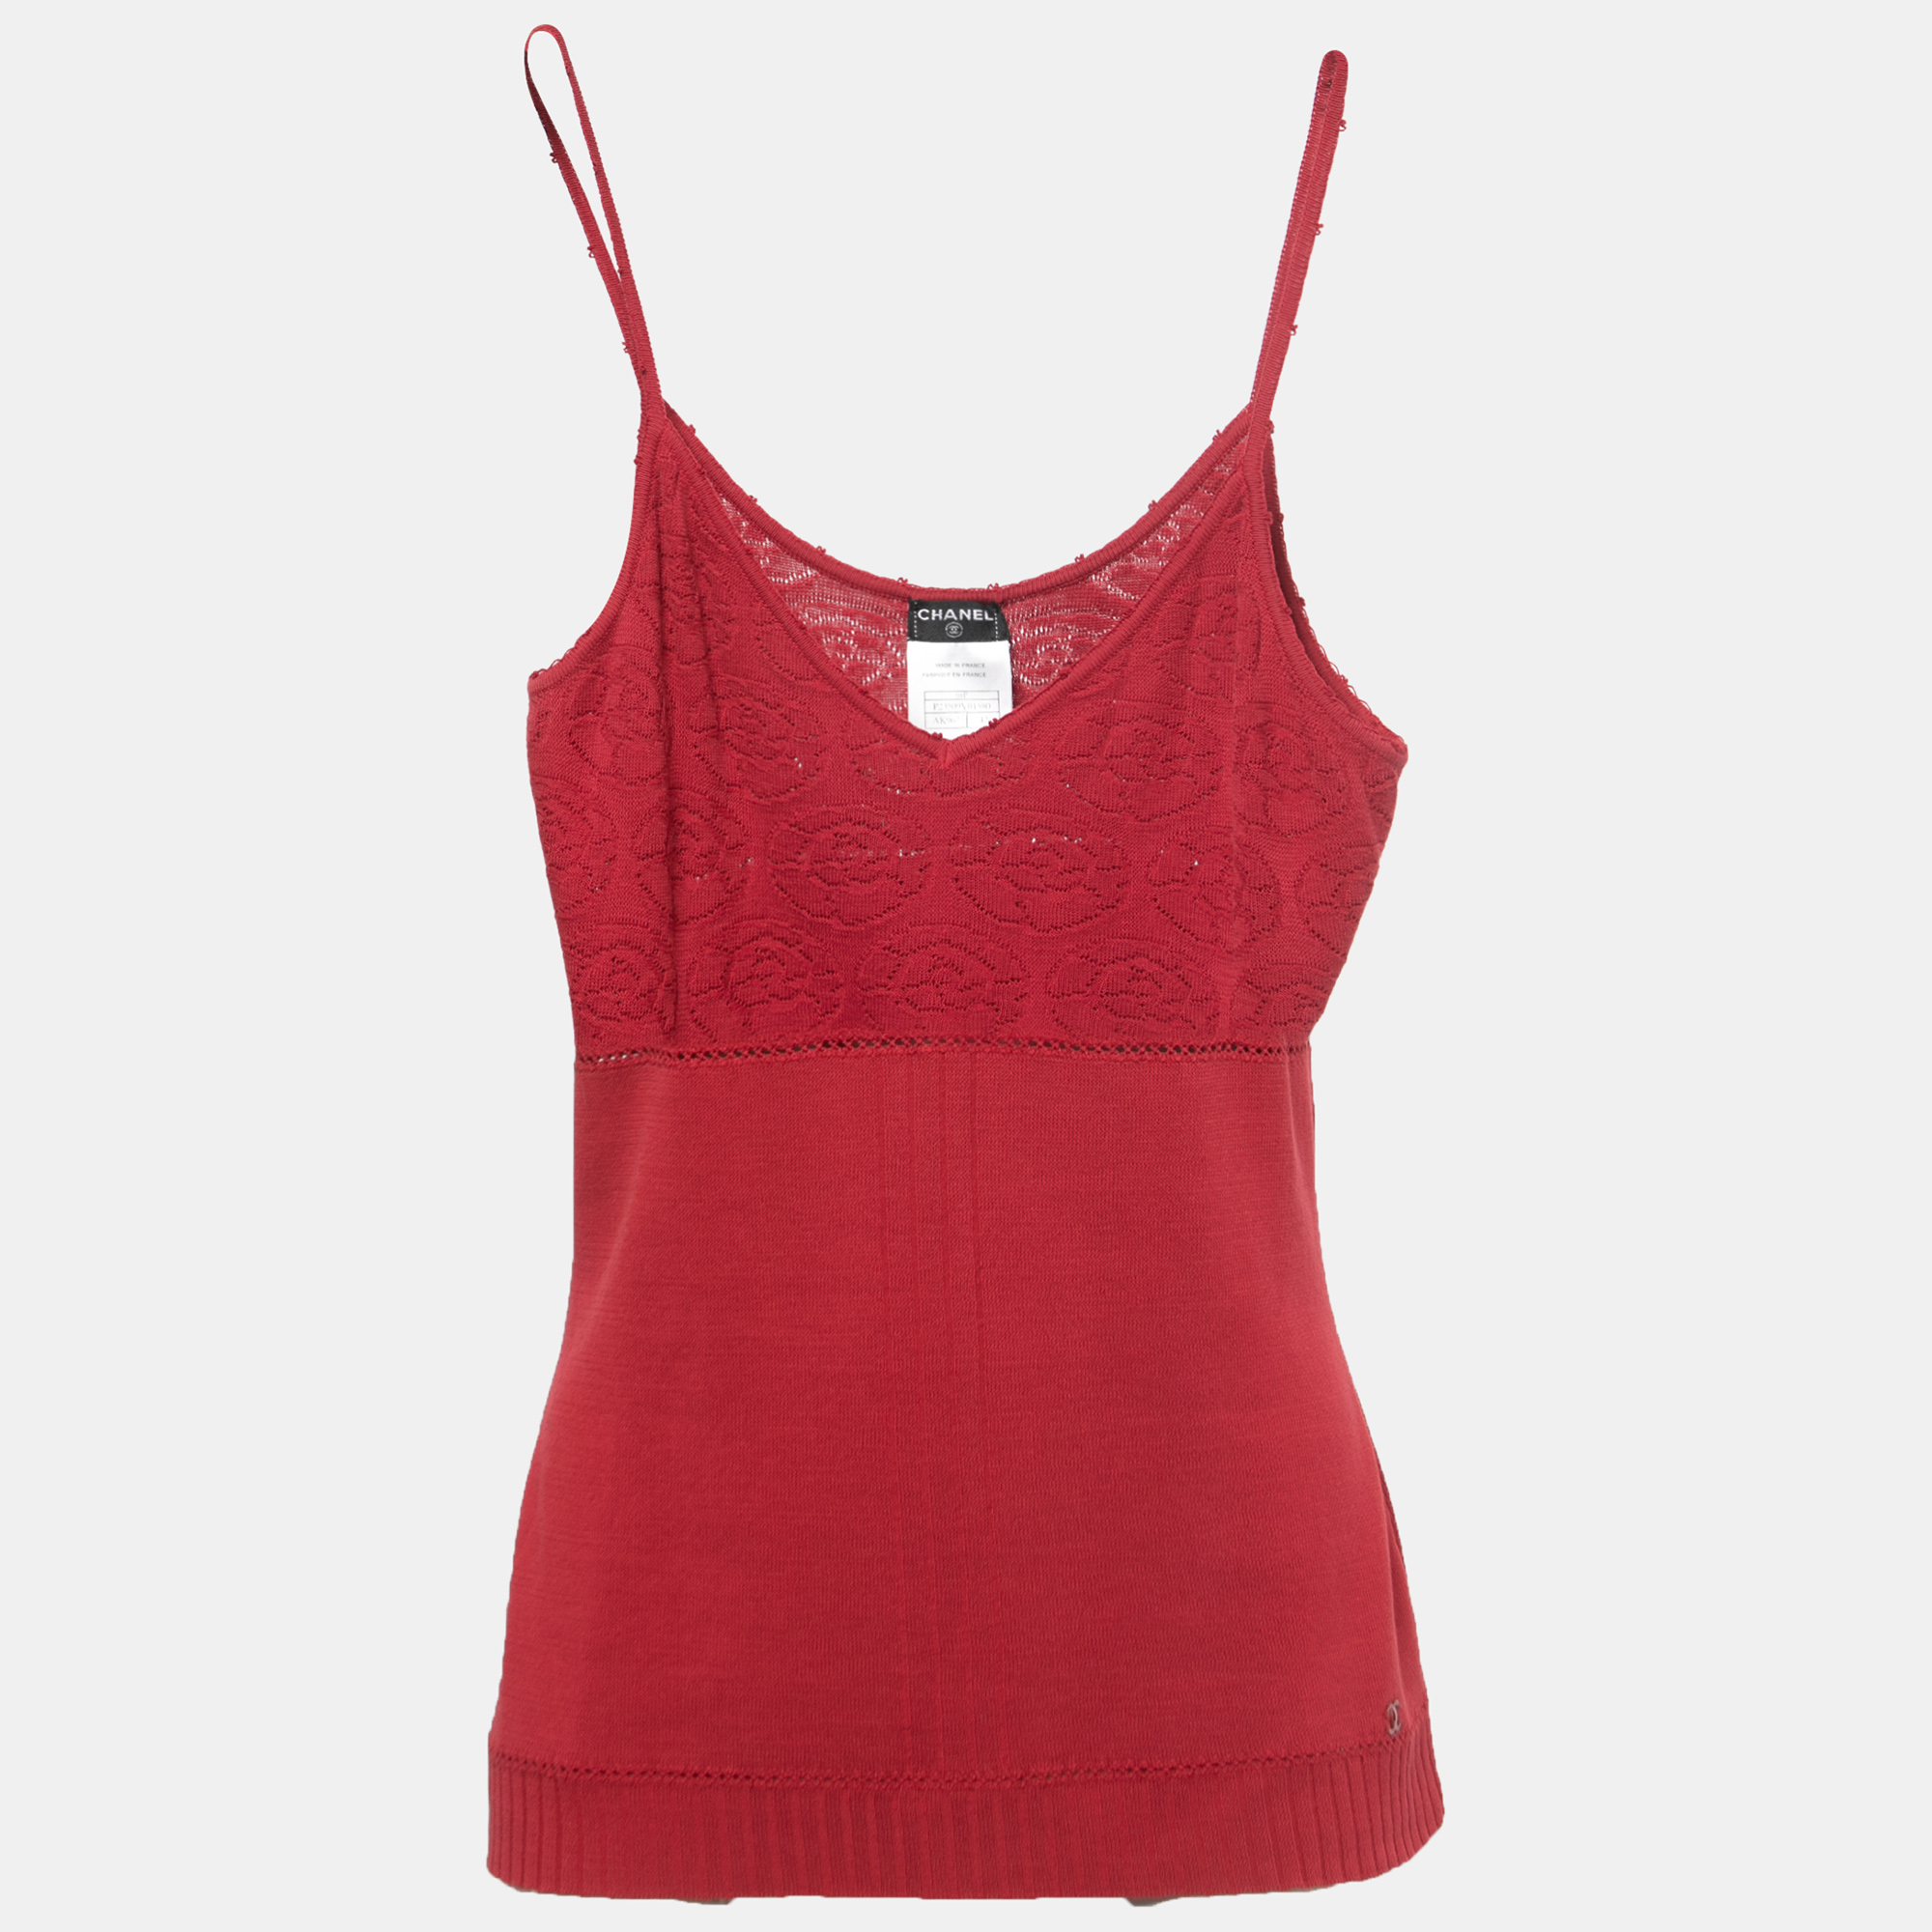 Pre-owned Chanel Burgundy Cotton Knit Camisole L